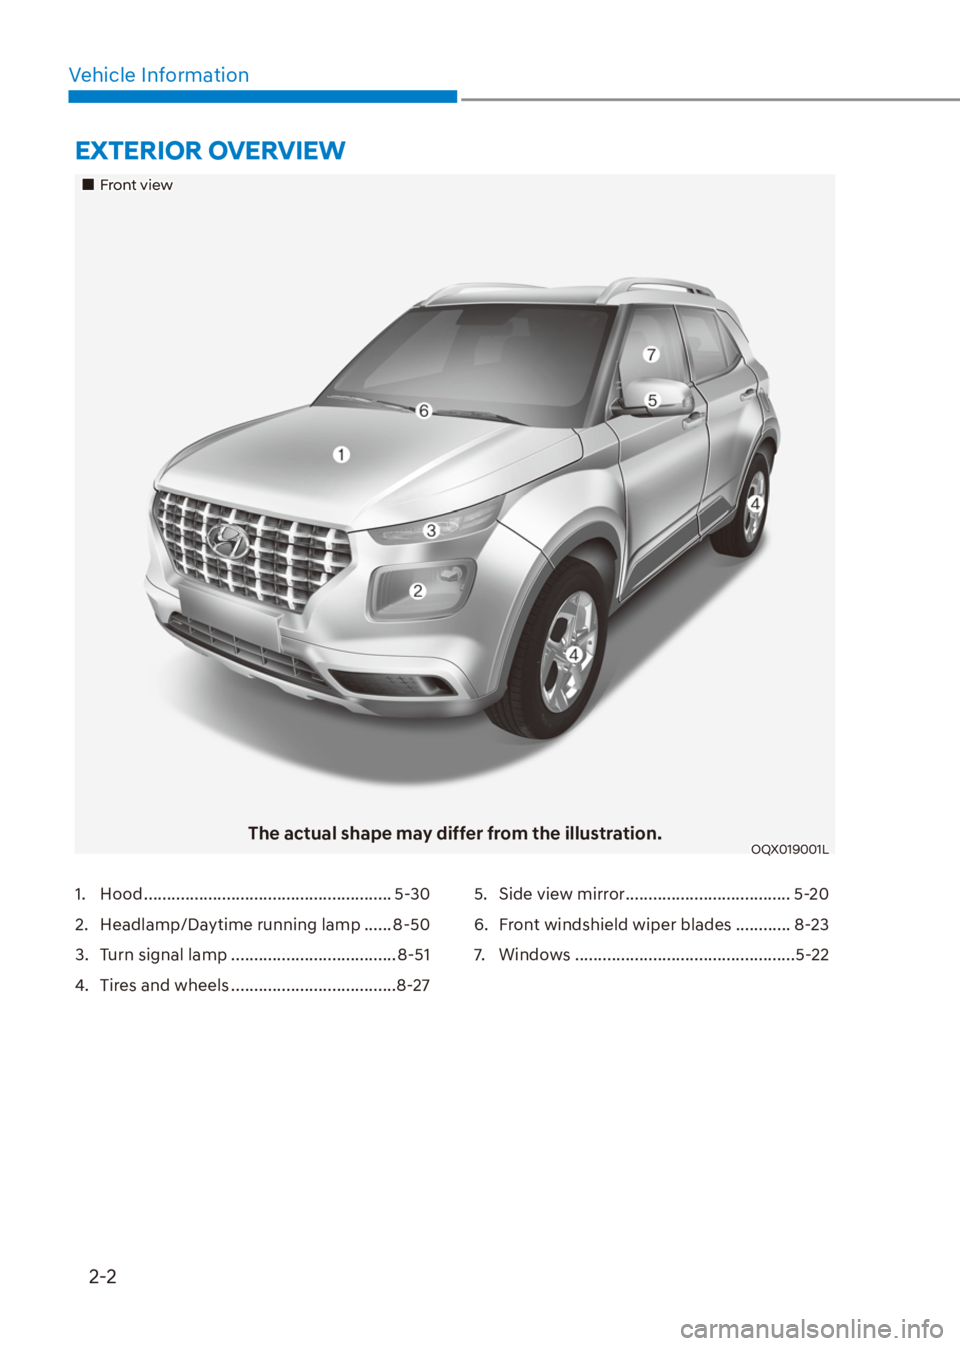 HYUNDAI VENUE 2021  Owners Manual 2-2
Vehicle Information
EXTERIOR OVERVIEW
��„Front view
The actual shape may differ from the illustration.OQX019001L
1. Hood ...................................................... 5-30
2.  Headlamp